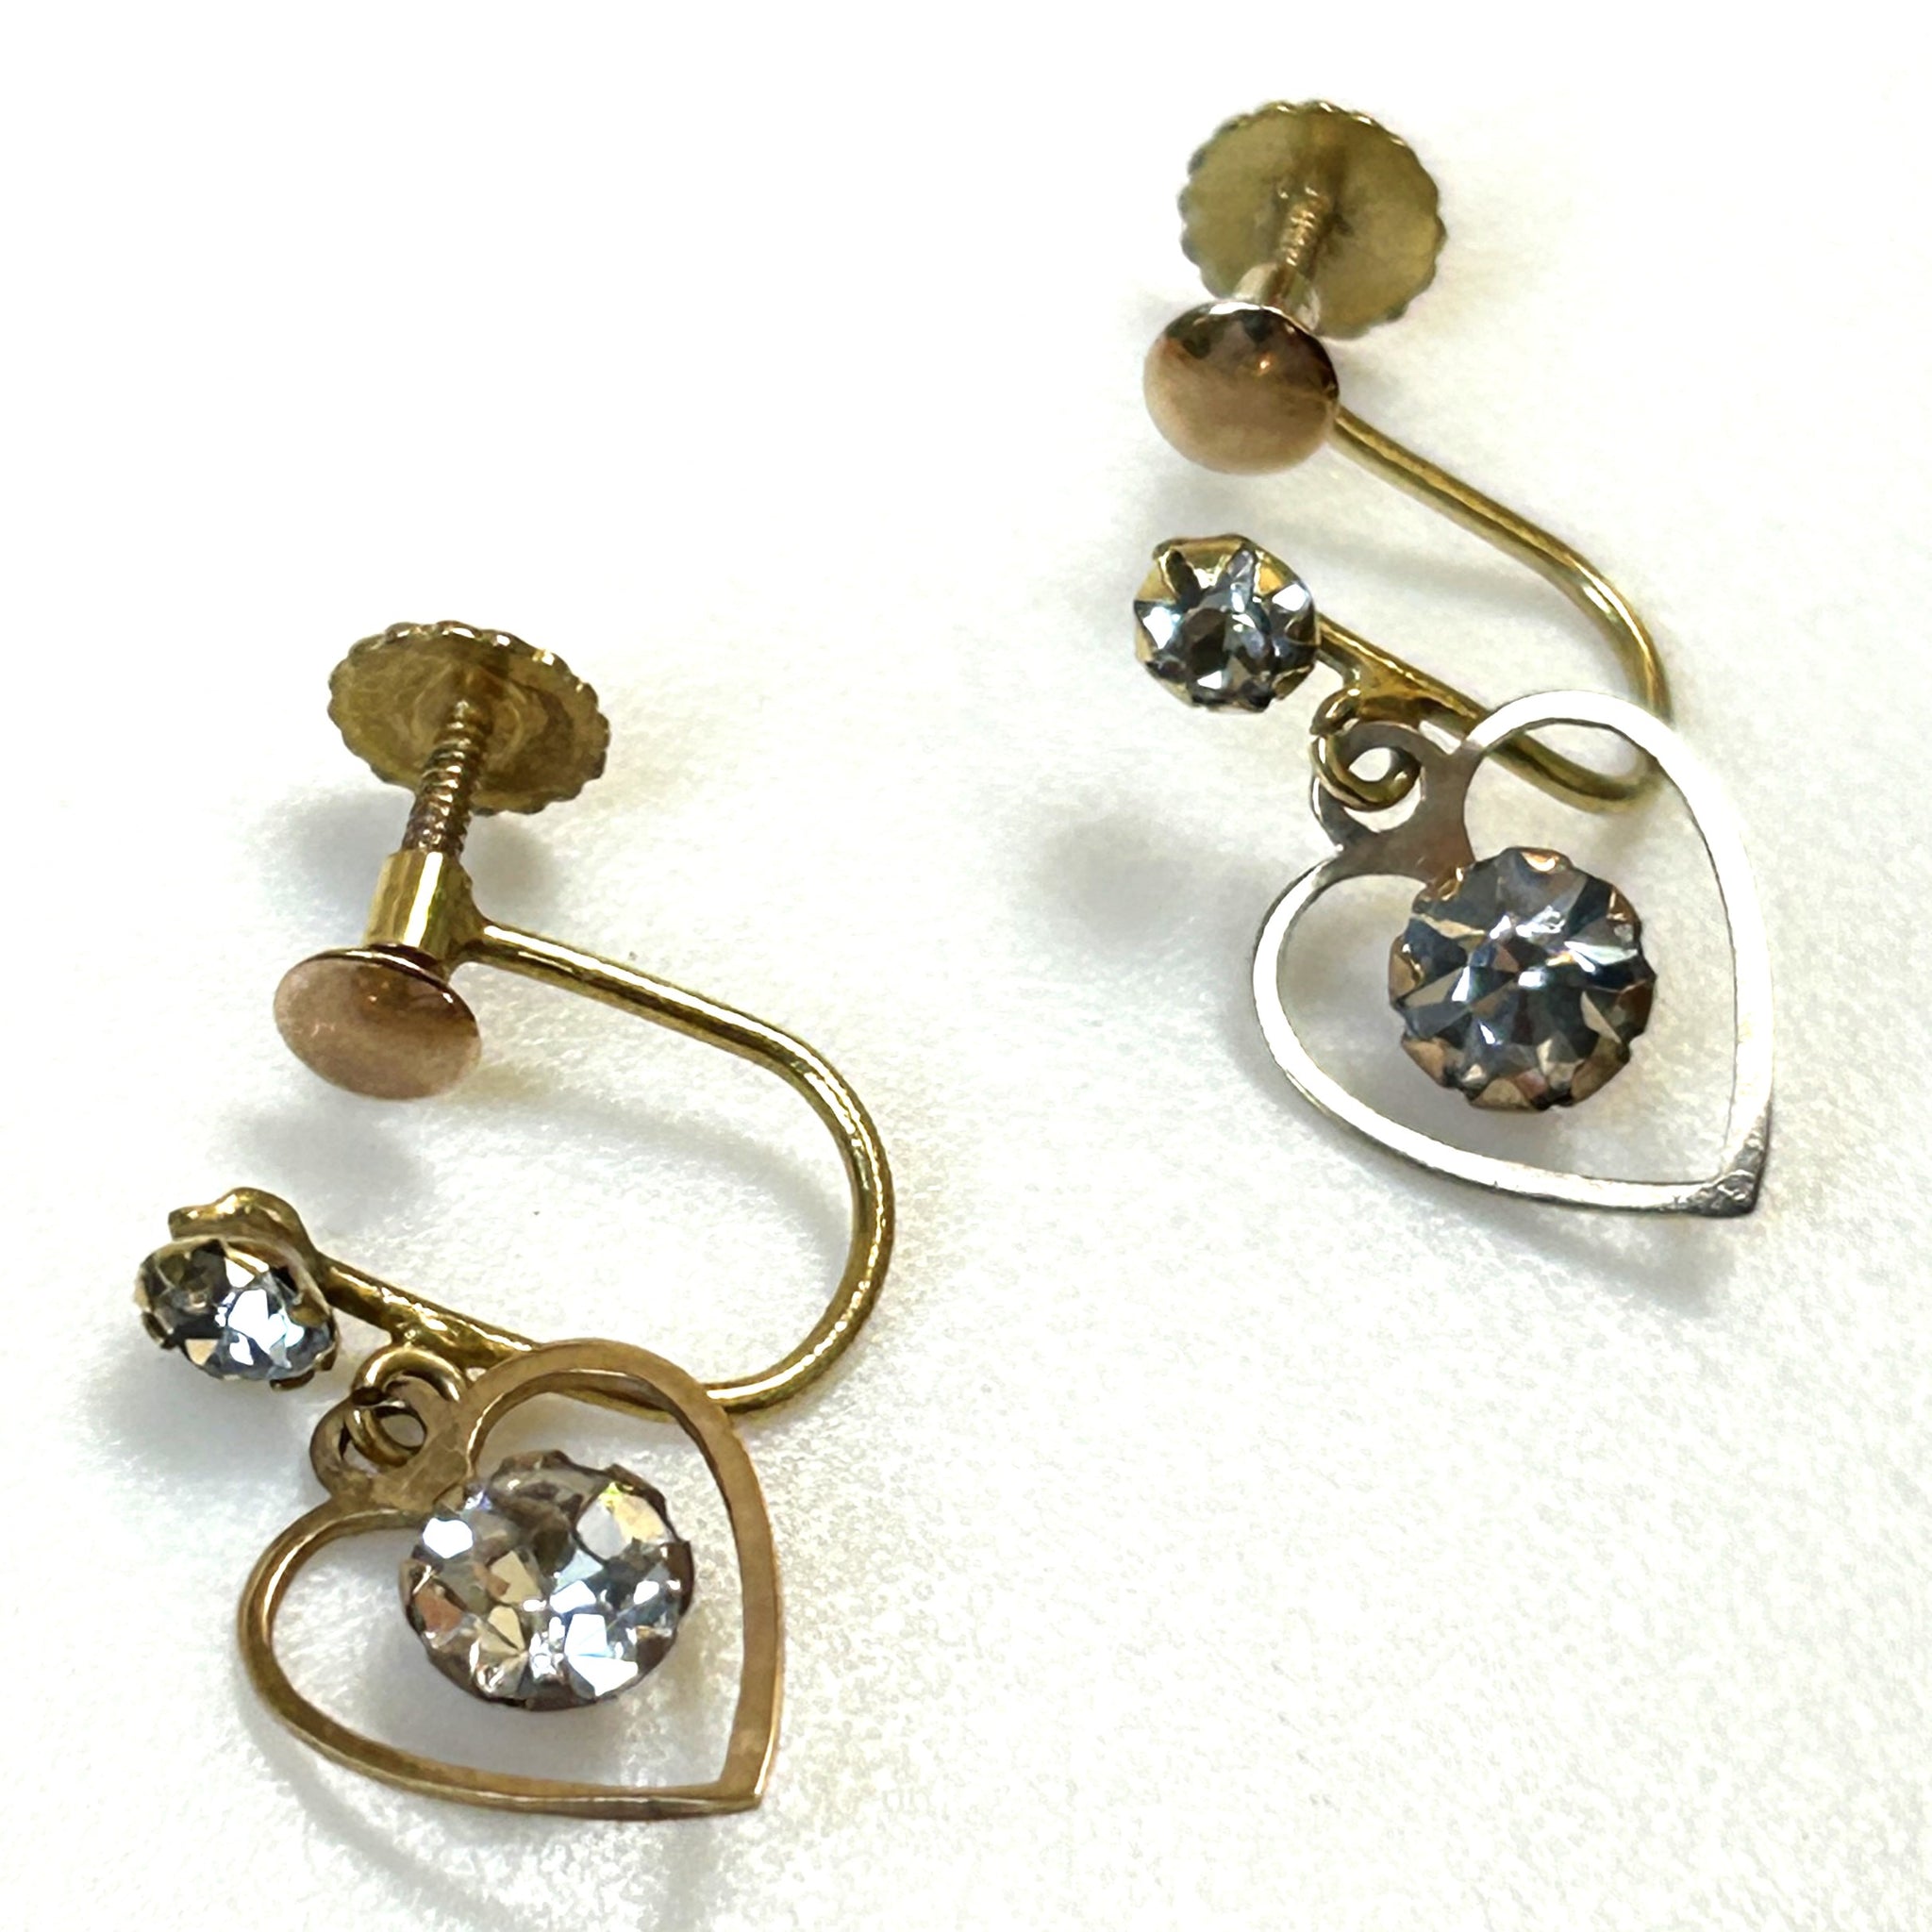 9ct Gold and Crystal Screw-on Drop Earrings